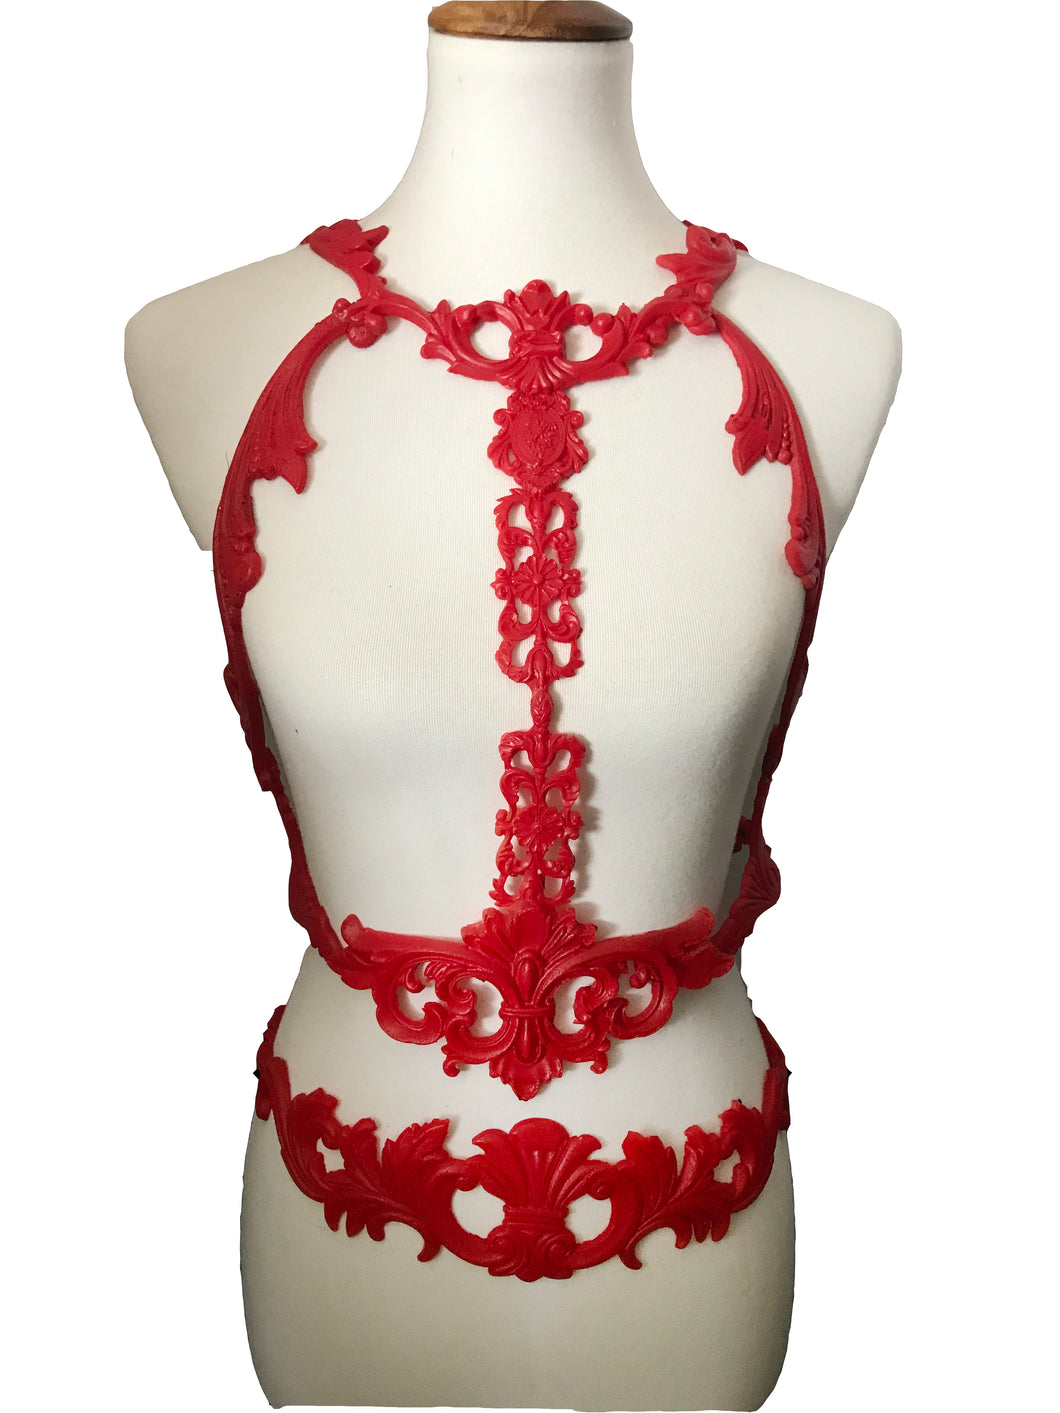 The Liquid Red 3D Handmade latex red rubber body harness set